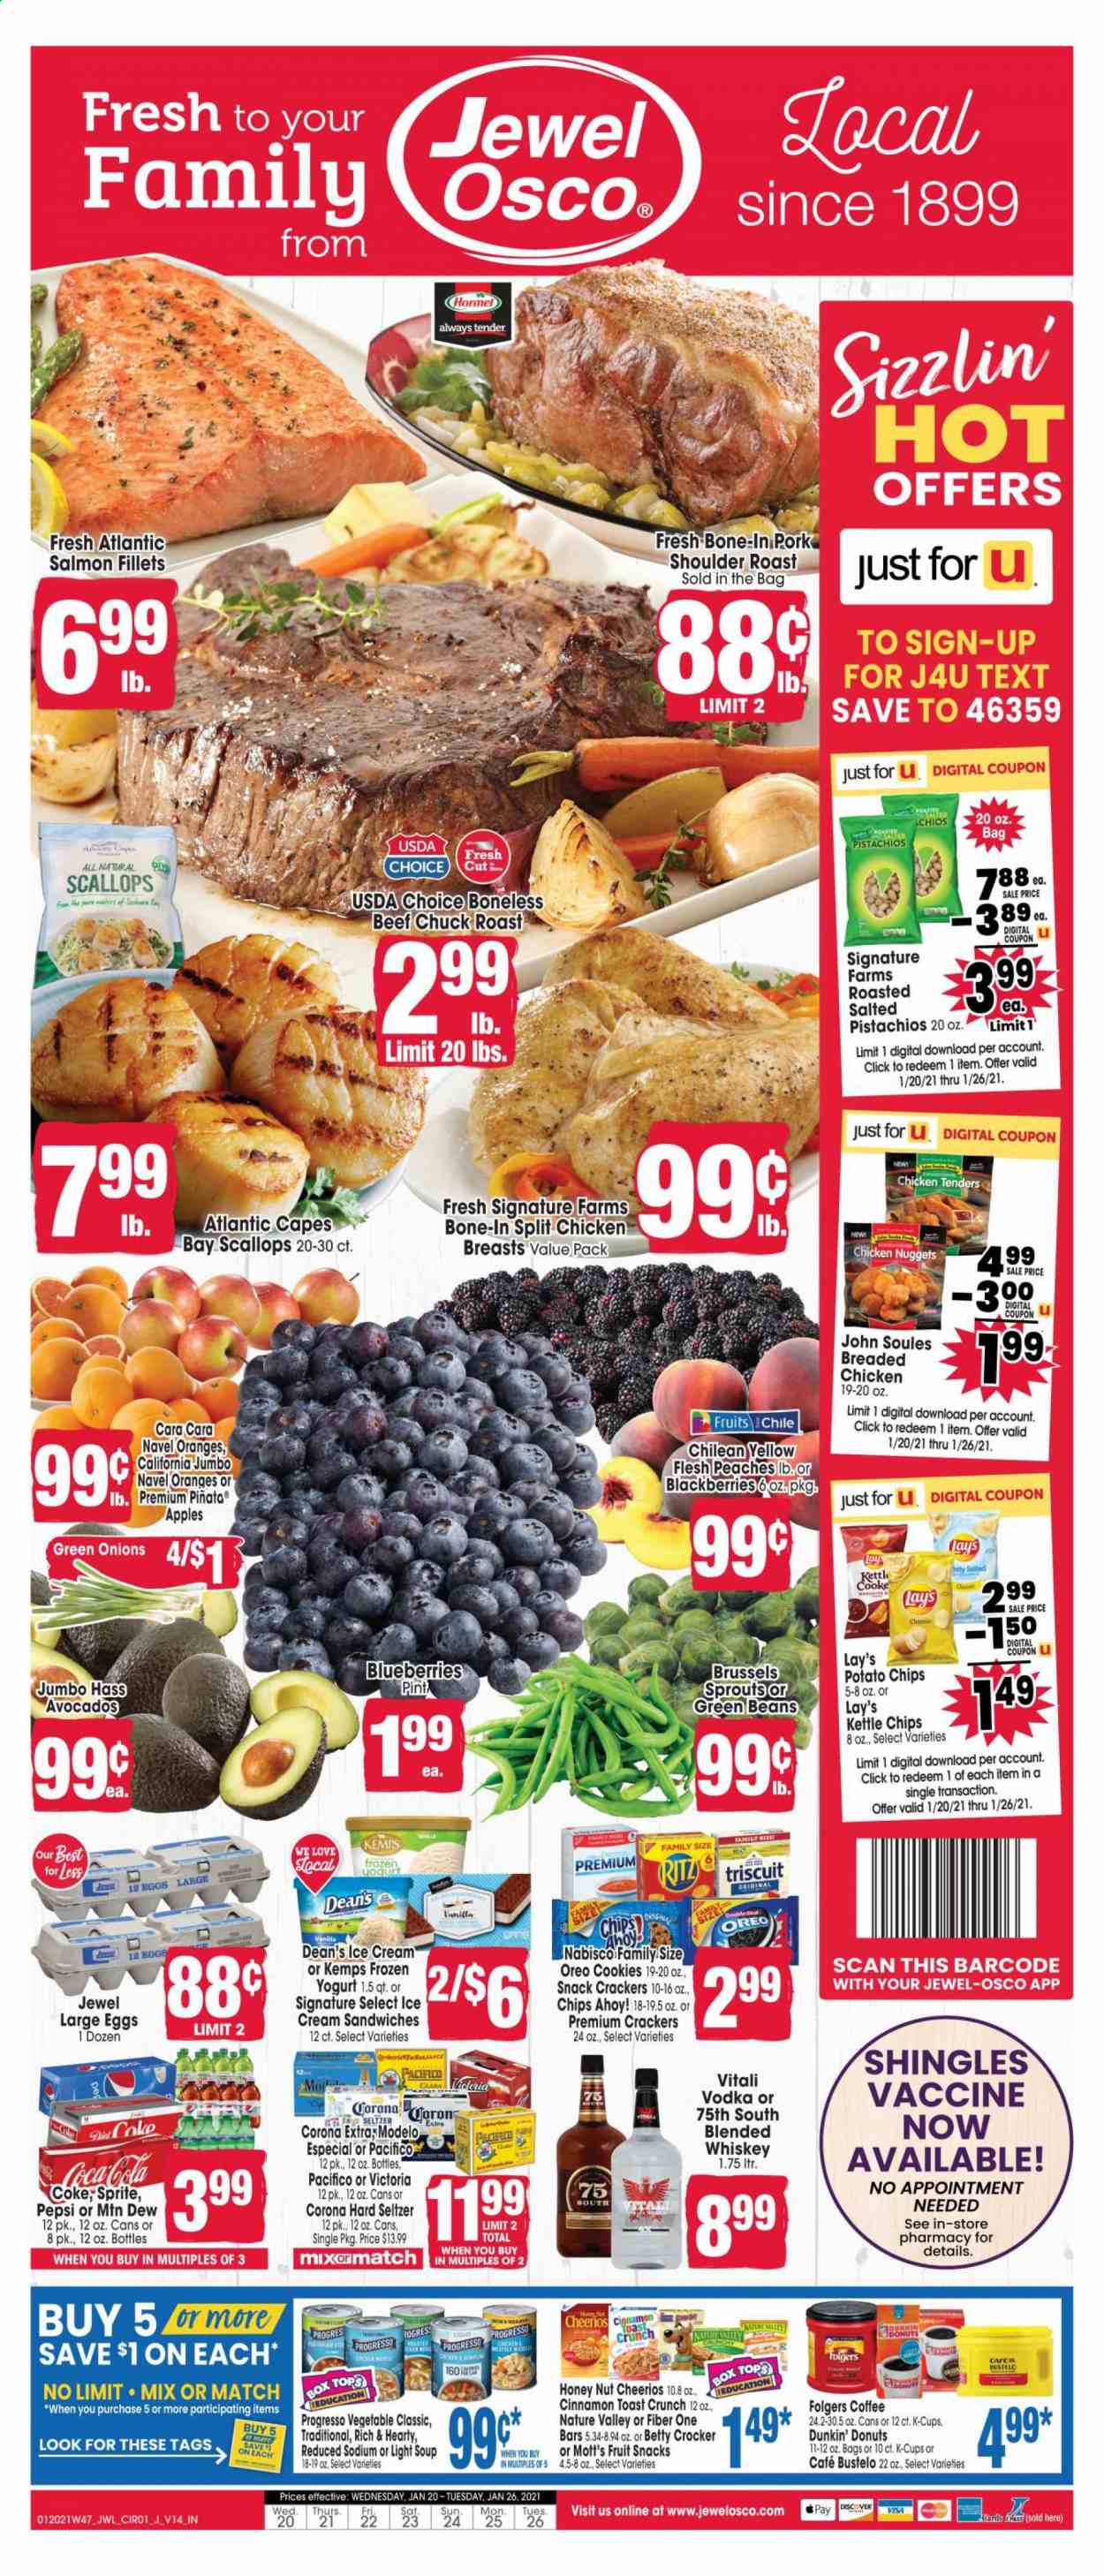 thumbnail - Jewel Osco Flyer - 01/20/2021 - 01/26/2021 - Sales products - Dunkin' Donuts, green beans, snack, brussel sprouts, green onion, avocado, blackberries, blueberries, peaches, Mott's, clams, fish fillets, salmon, salmon fillet, scallops, seafood, pork roast, chicken tenders, soup, nuggets, chicken nuggets, Progresso, Hormel, beef chuck roast, ready meal, breaded chicken, Kemps, Oreo, snack bar, eggs, large eggs, ice cream, ice cream sandwich, frozen yoghurt, cookies, cereal bar, crackers, fruit snack, Chips Ahoy!, RITZ, Nabisco, potato chips, Lay’s, Kettle chips, cereals, Cheerios, Nature Valley, Fiber One, Coca-Cola, Mountain Dew, Sprite, Pepsi, soft drink, Coke, carbonated soft drink, Folgers, coffee capsules, K-Cups, vodka, whiskey, Hard Seltzer, beer, Corona Extra, Modelo, beef meat, chuck roast, navel oranges. Page 1.